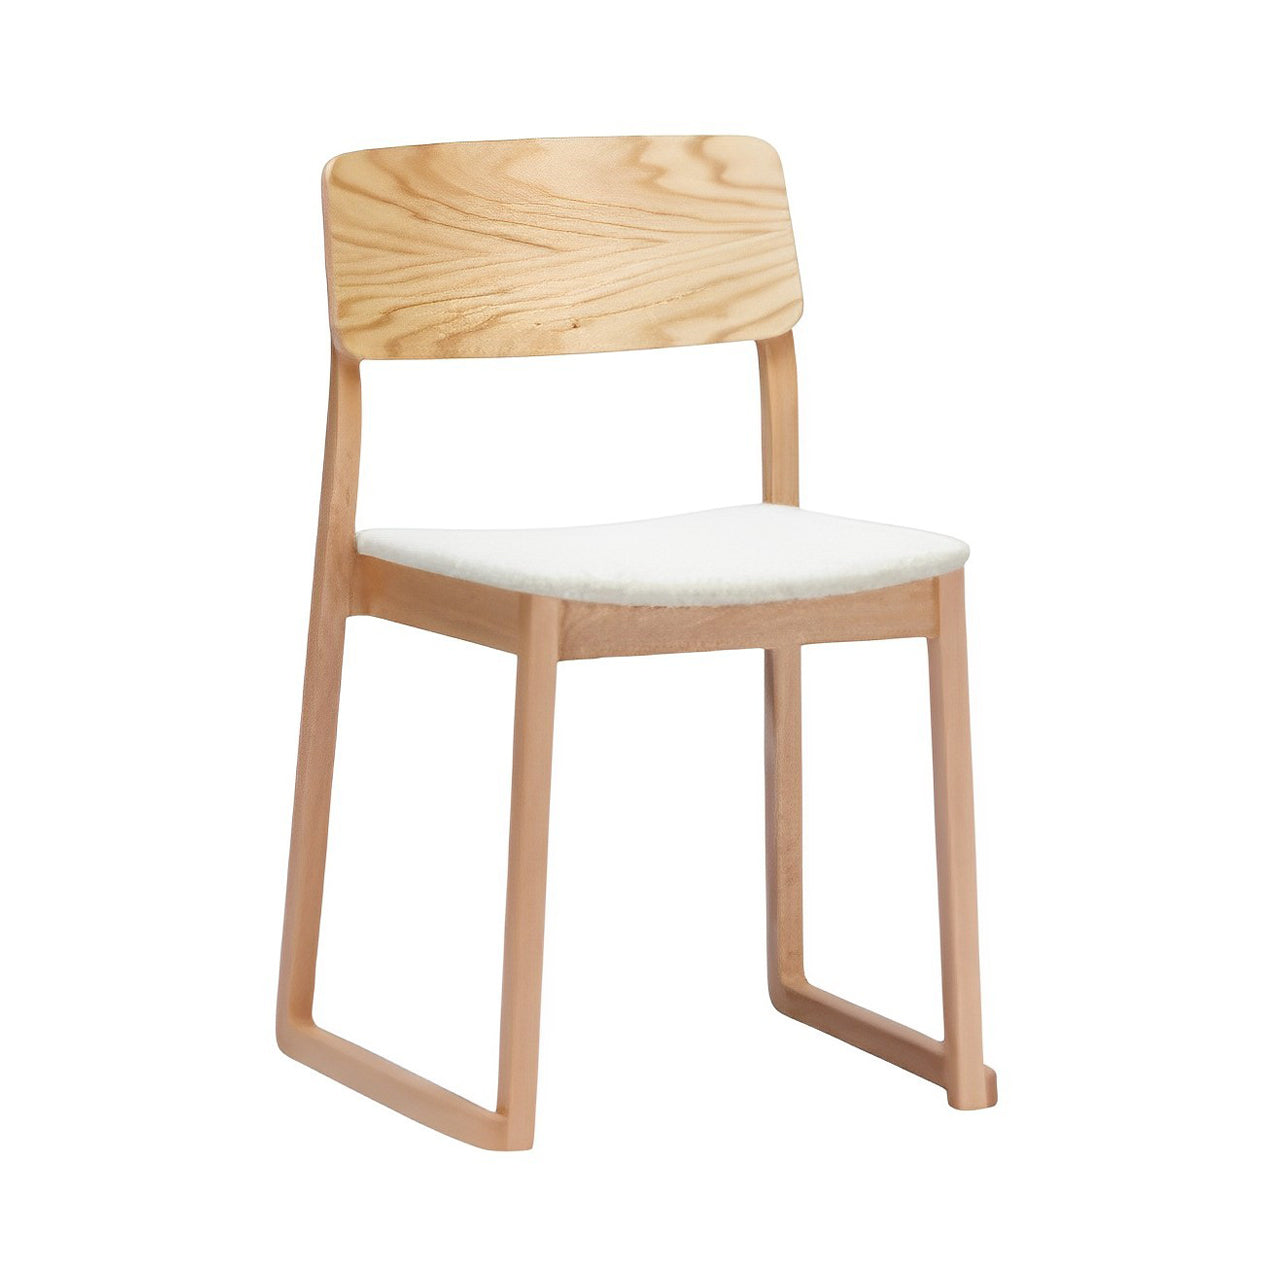 Sori Chair: Upholstered + Large - 30.3